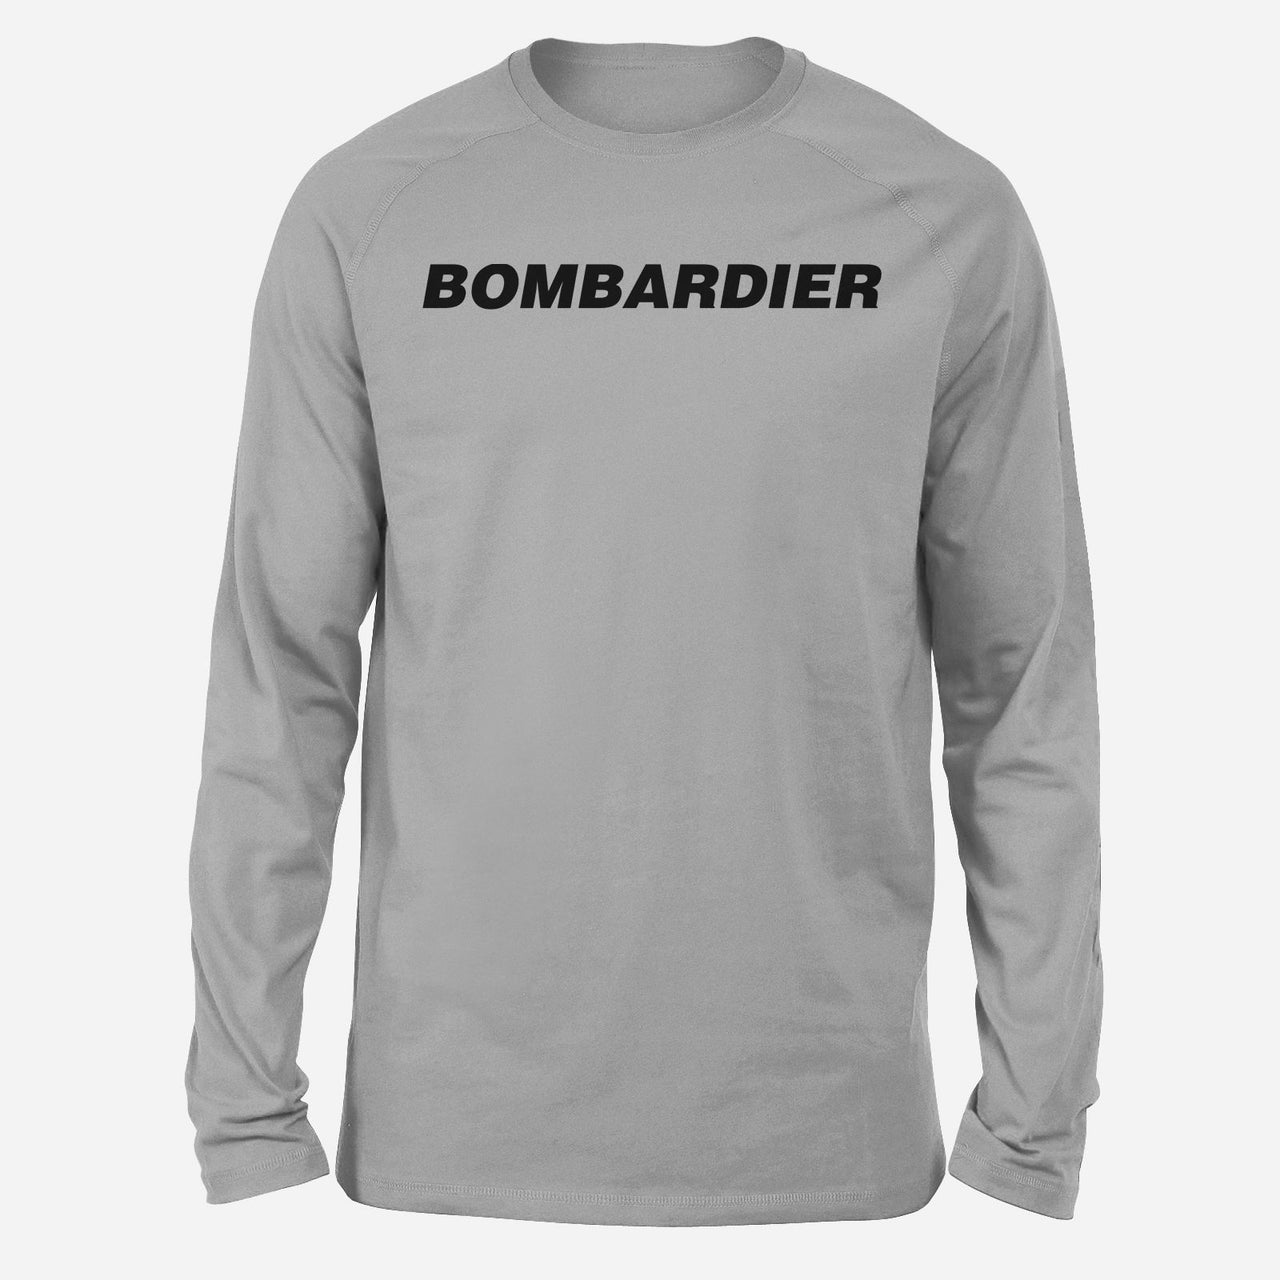 Bombardier & Text Designed Long-Sleeve T-Shirts